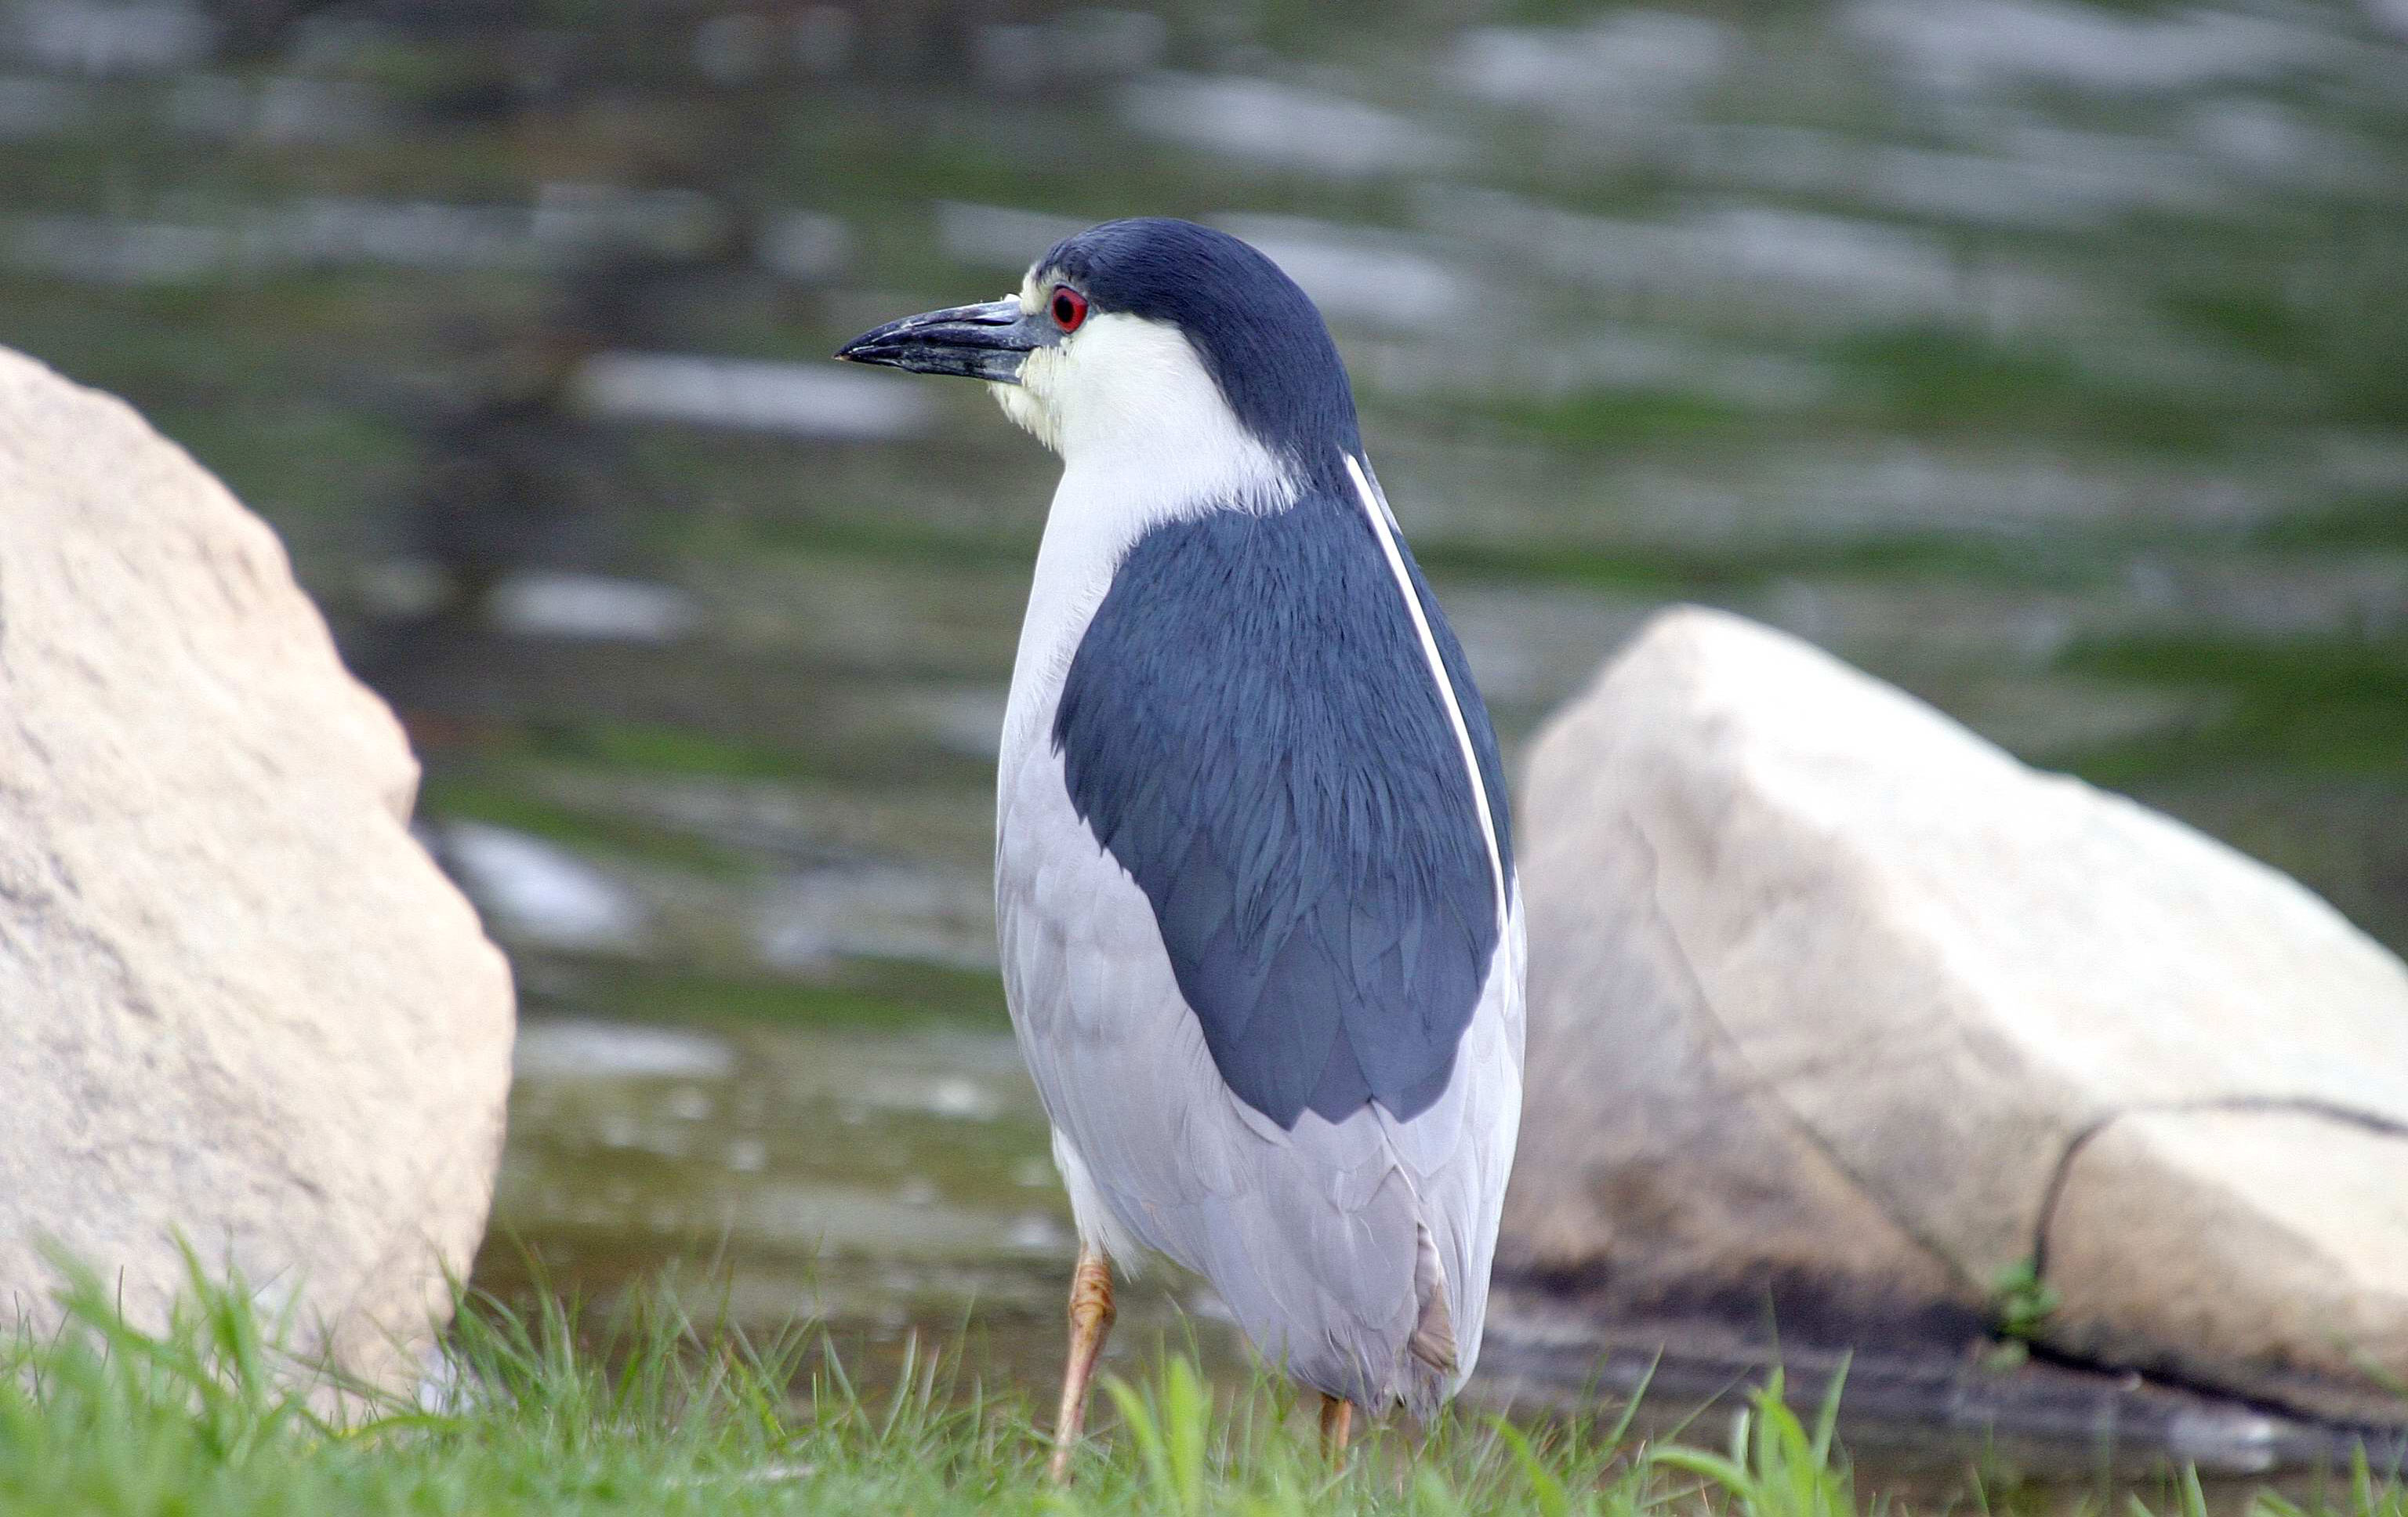 A black-crowned night heron standing in grass.